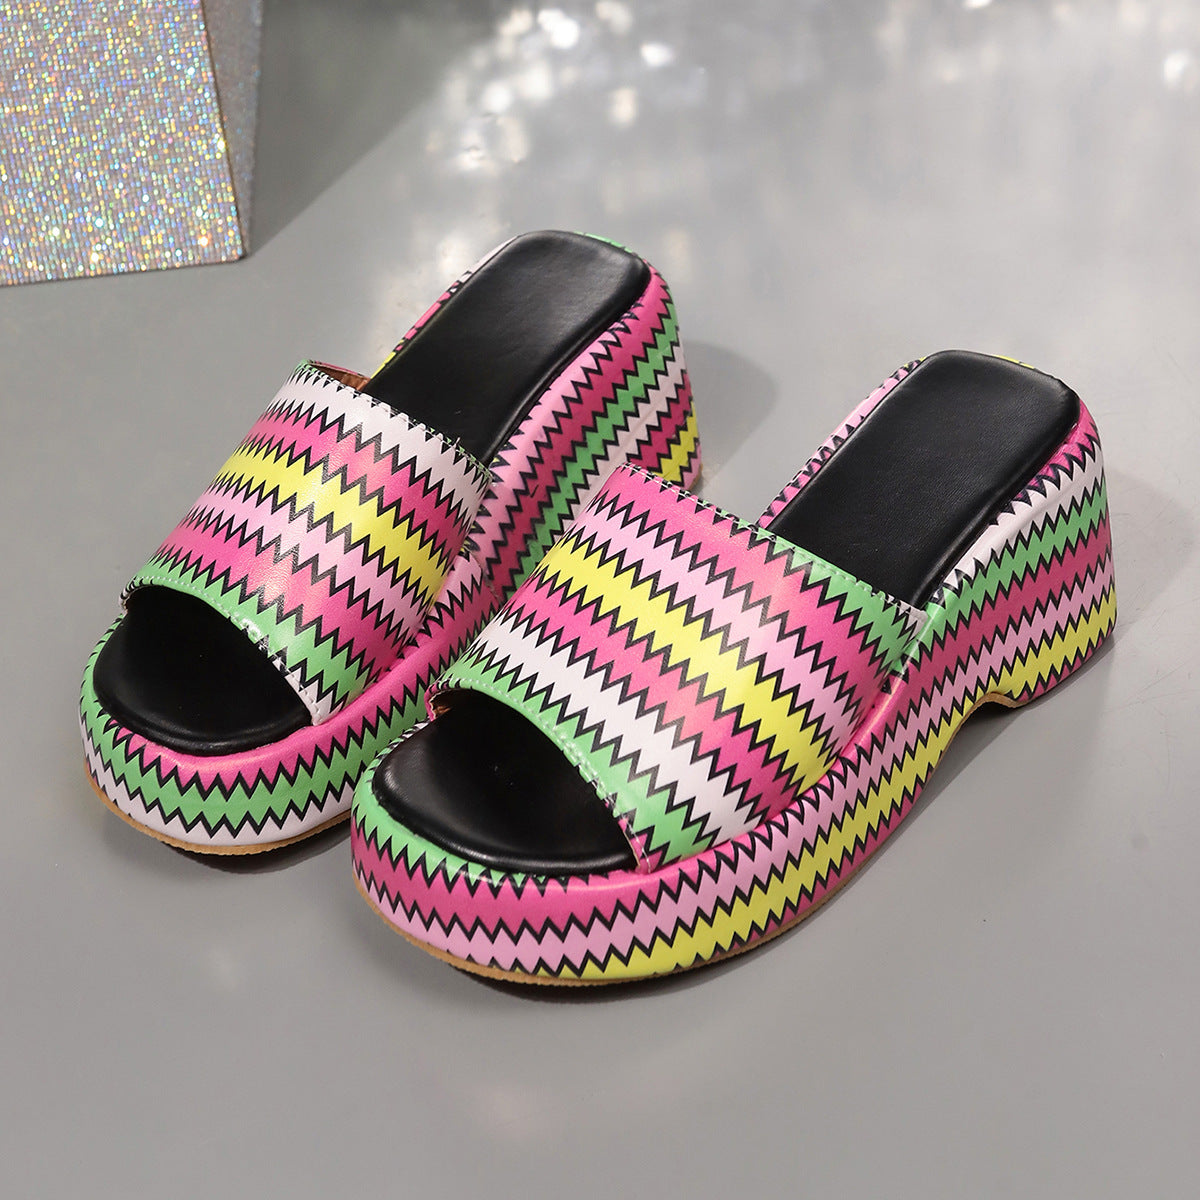 Fashion Colorful Wave Print Wedges Sandals Summer Outdoor High Heel Slippers Thick Bottom Shoes For Women